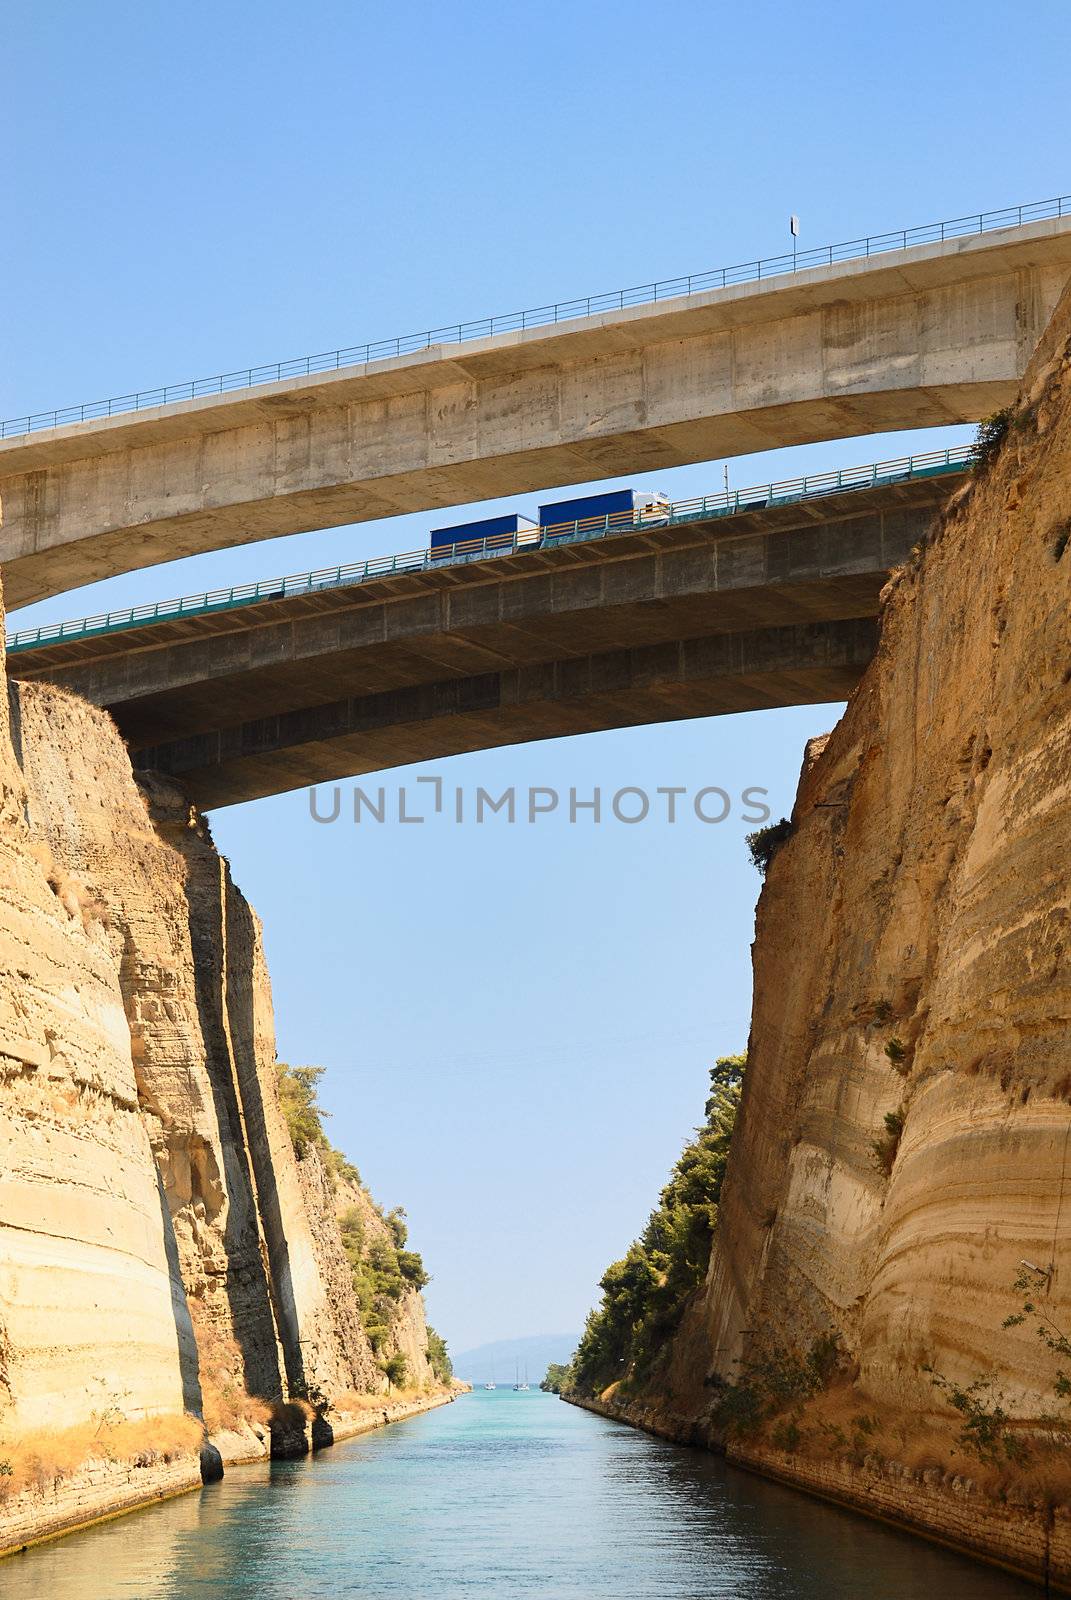 The famous Corinth Canal between Ionian and Aegean seas in Greece